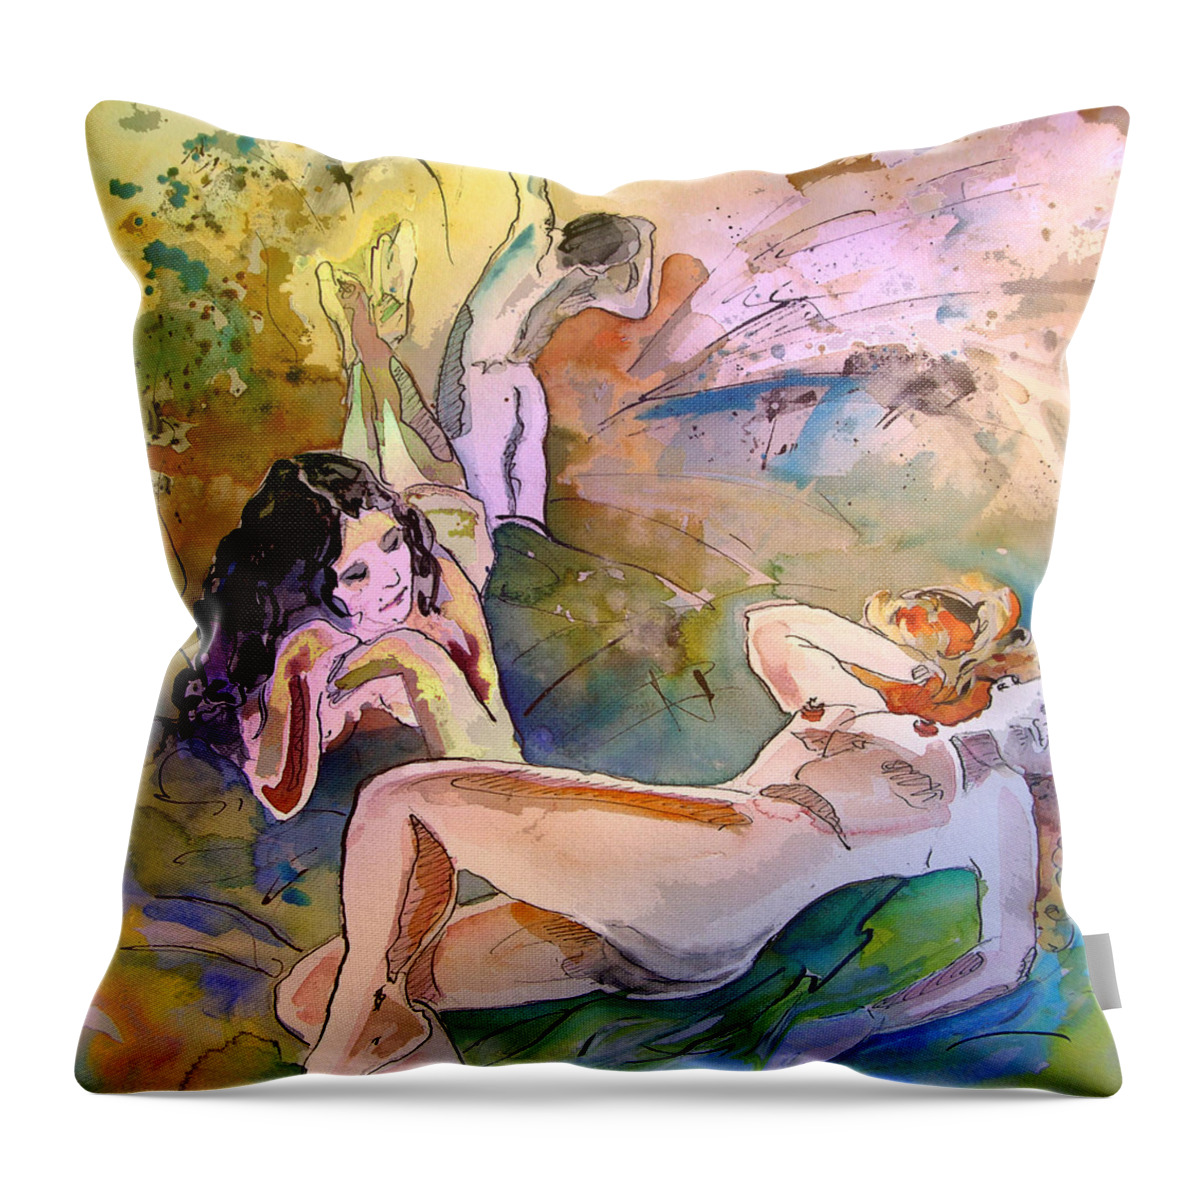 Erotic Throw Pillow featuring the painting Eroscape 1201 by Miki De Goodaboom